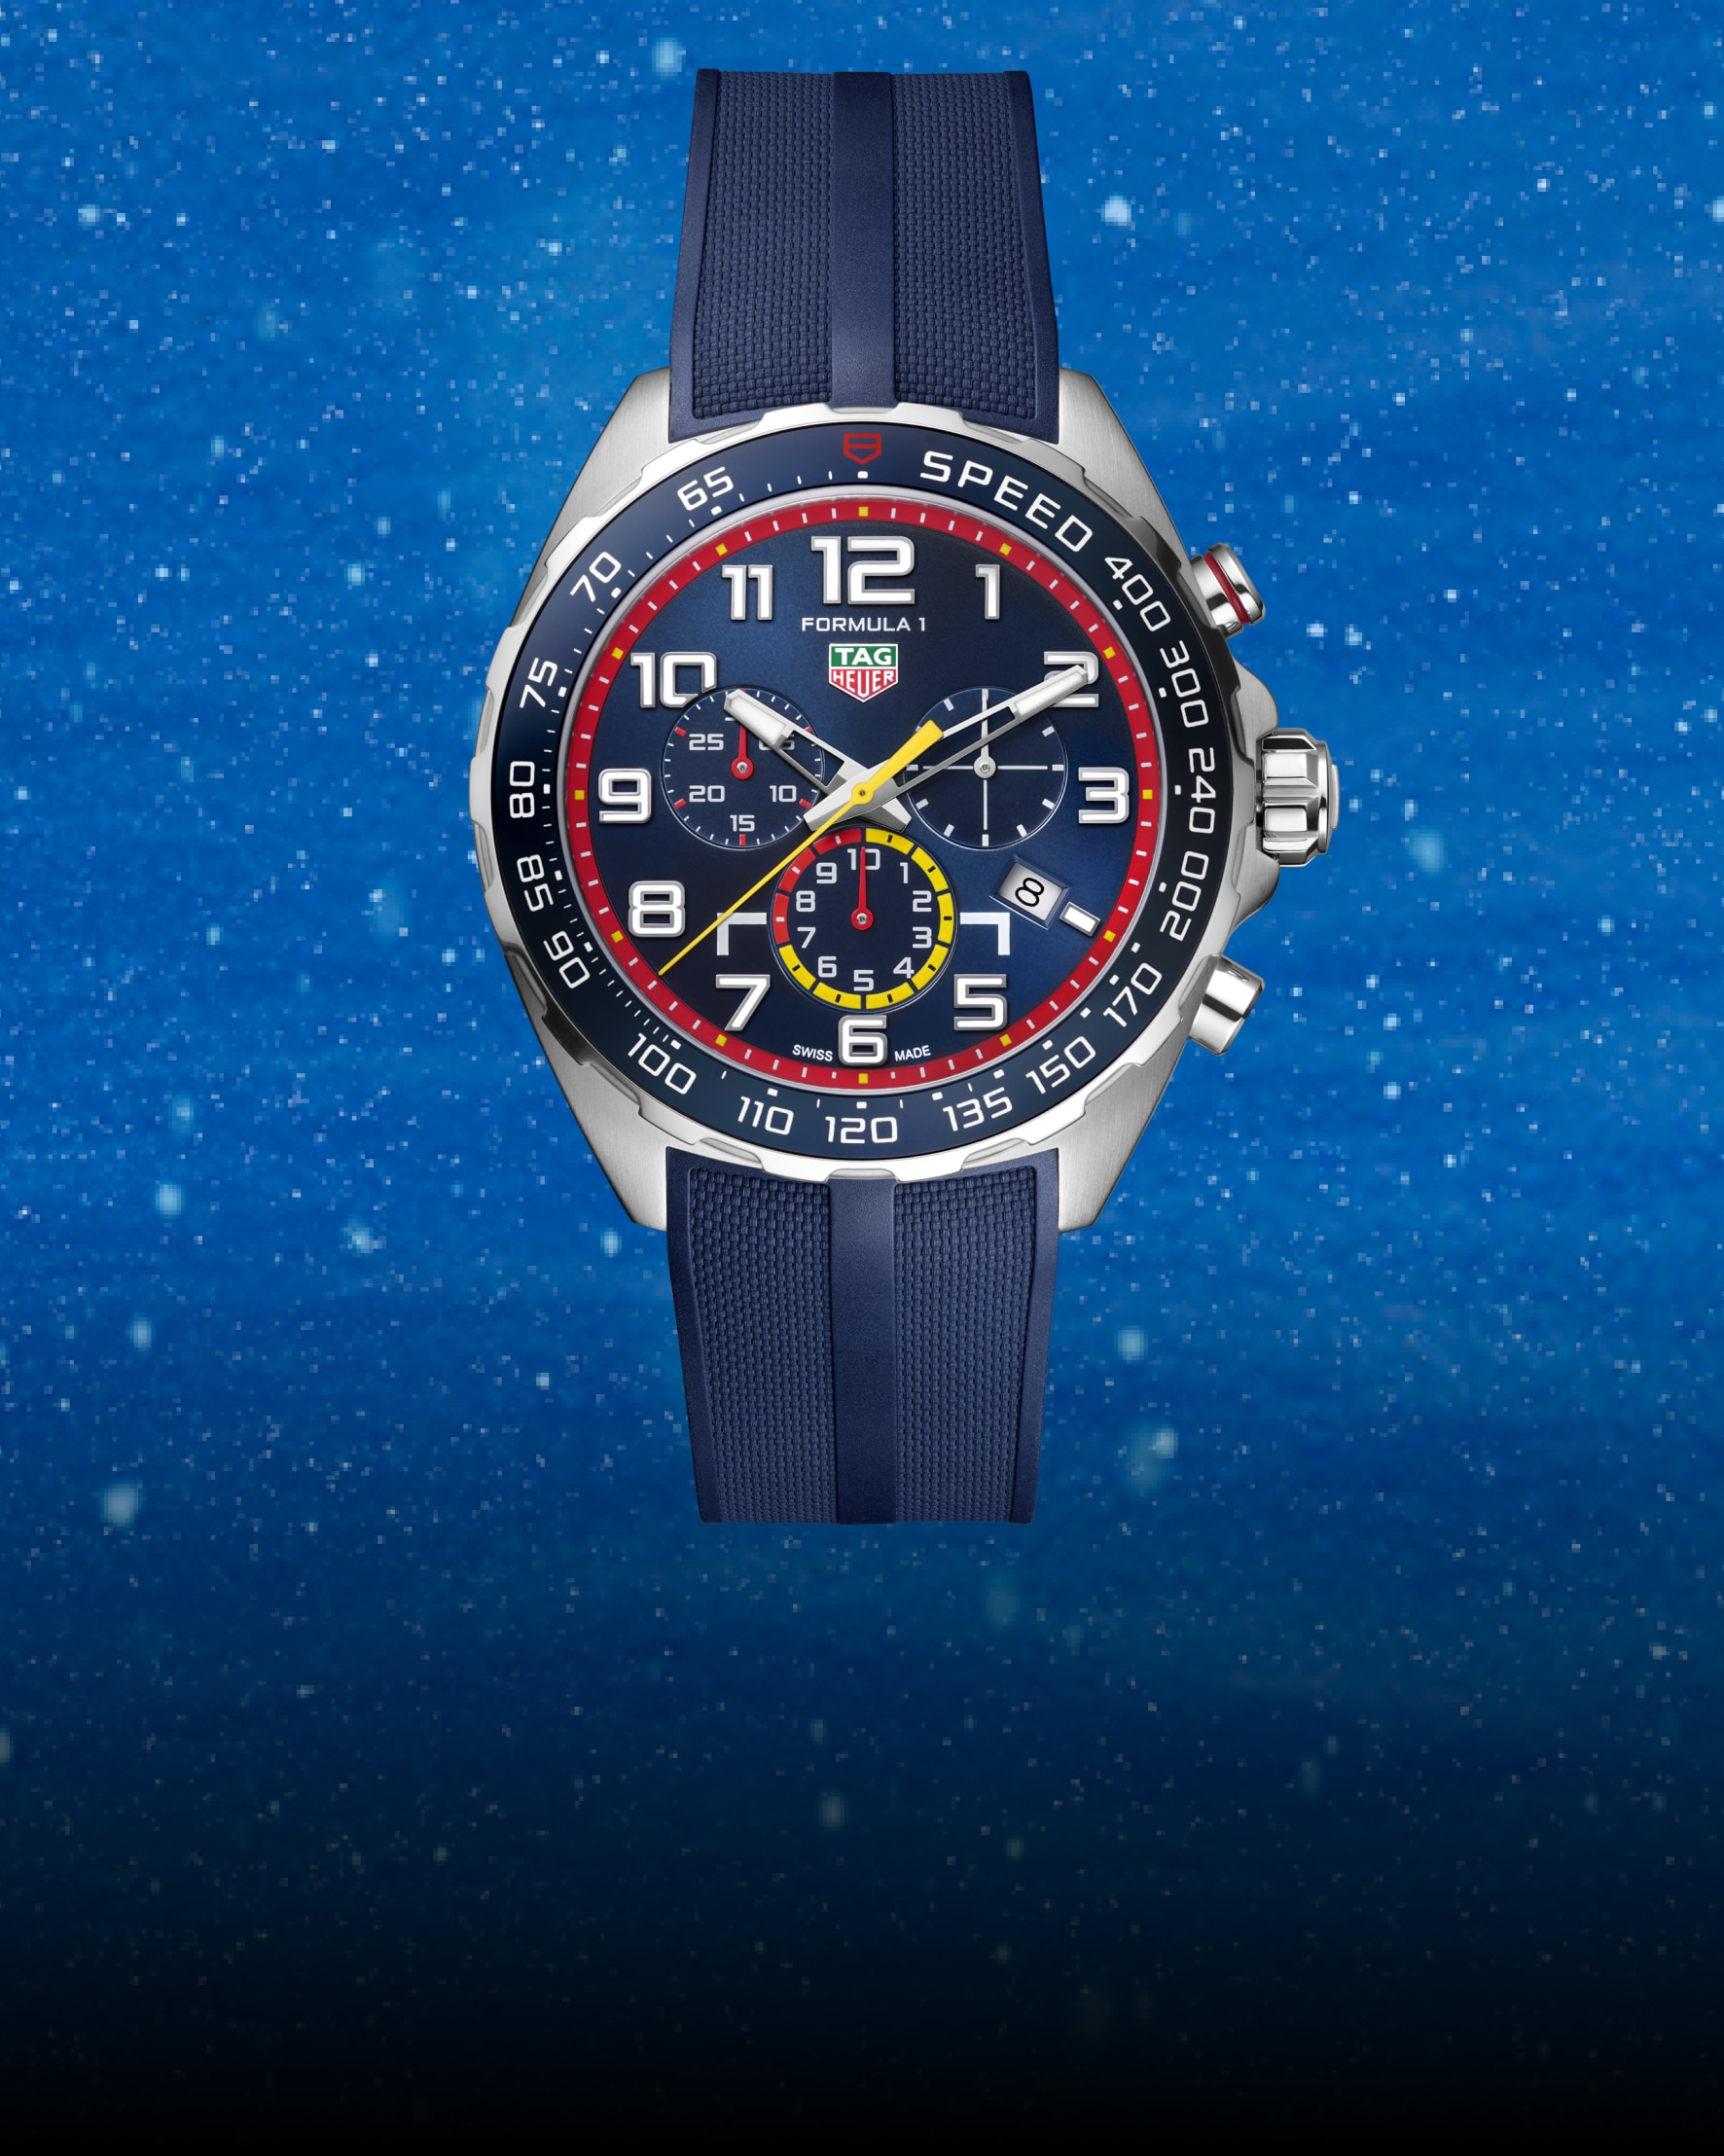 TAG Heuer® Official Website - Swiss Luxury Watches since 1860